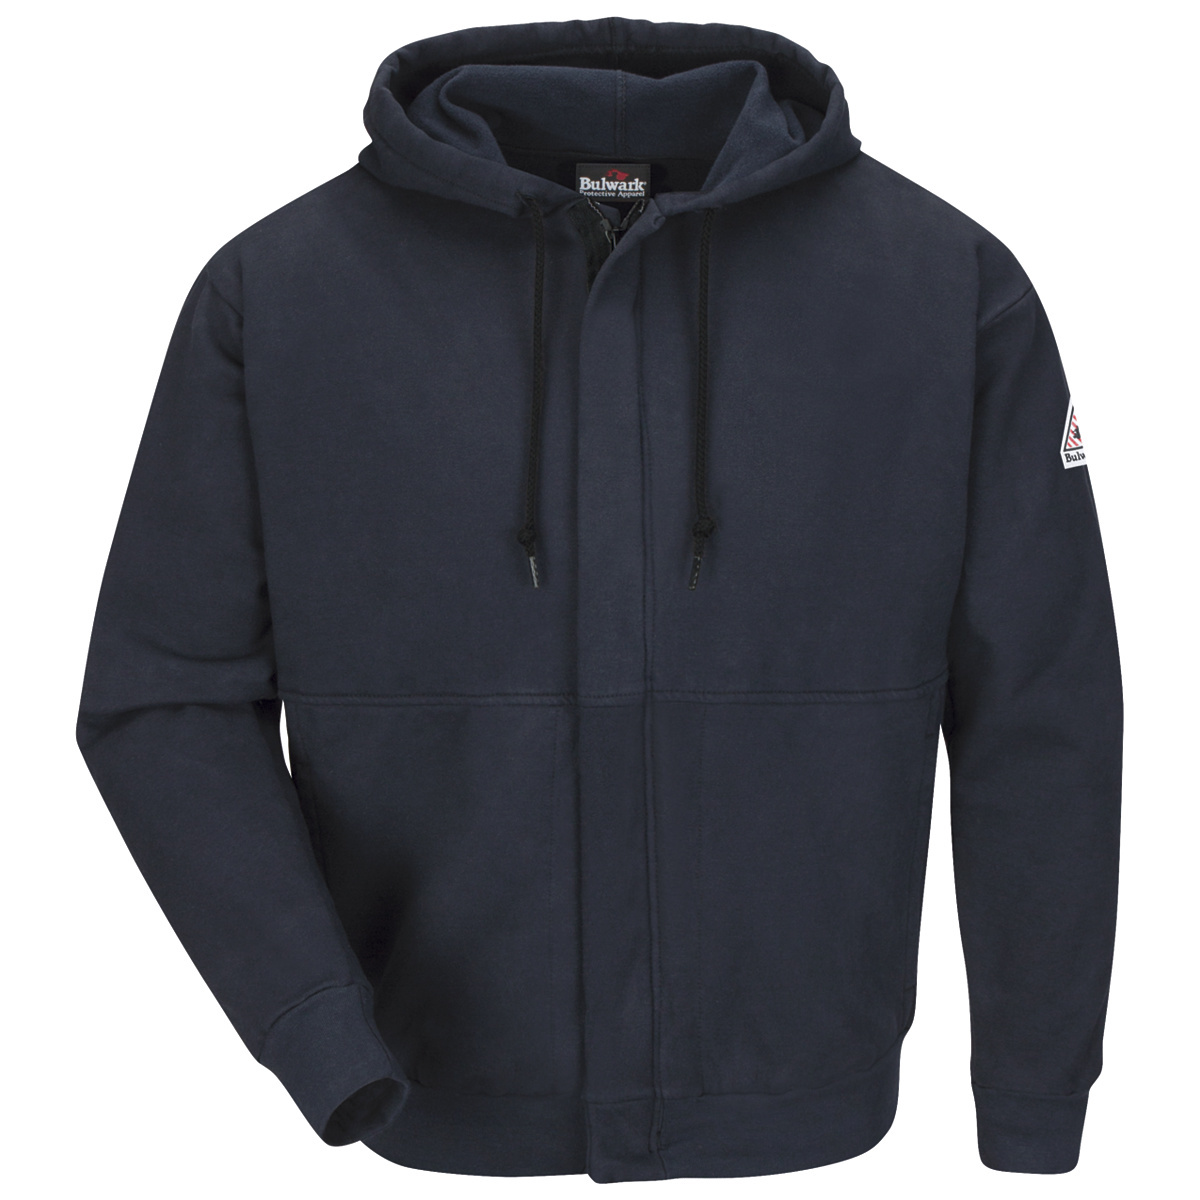 Bulwark® 3X Tall Navy Blue Cotton/Spandex Brushed Fleece Flame Resistant Hooded Sweatshirt With Zipper Front Closure